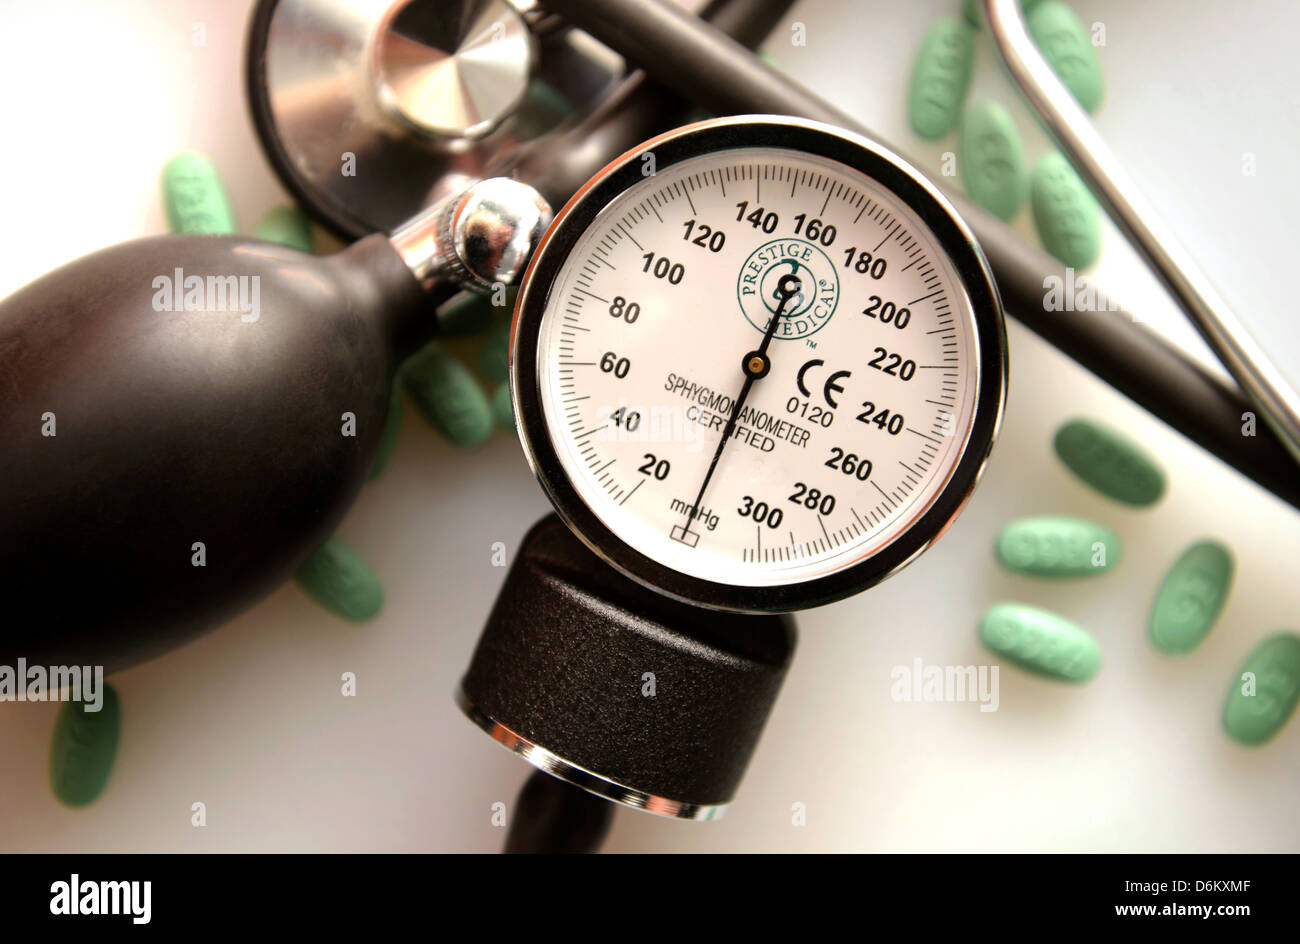 A blood pressure cuff, or sphygmomanometer, a stethoscope and Losartan 100 mg tablets, used to treat hypertension. Stock Photo